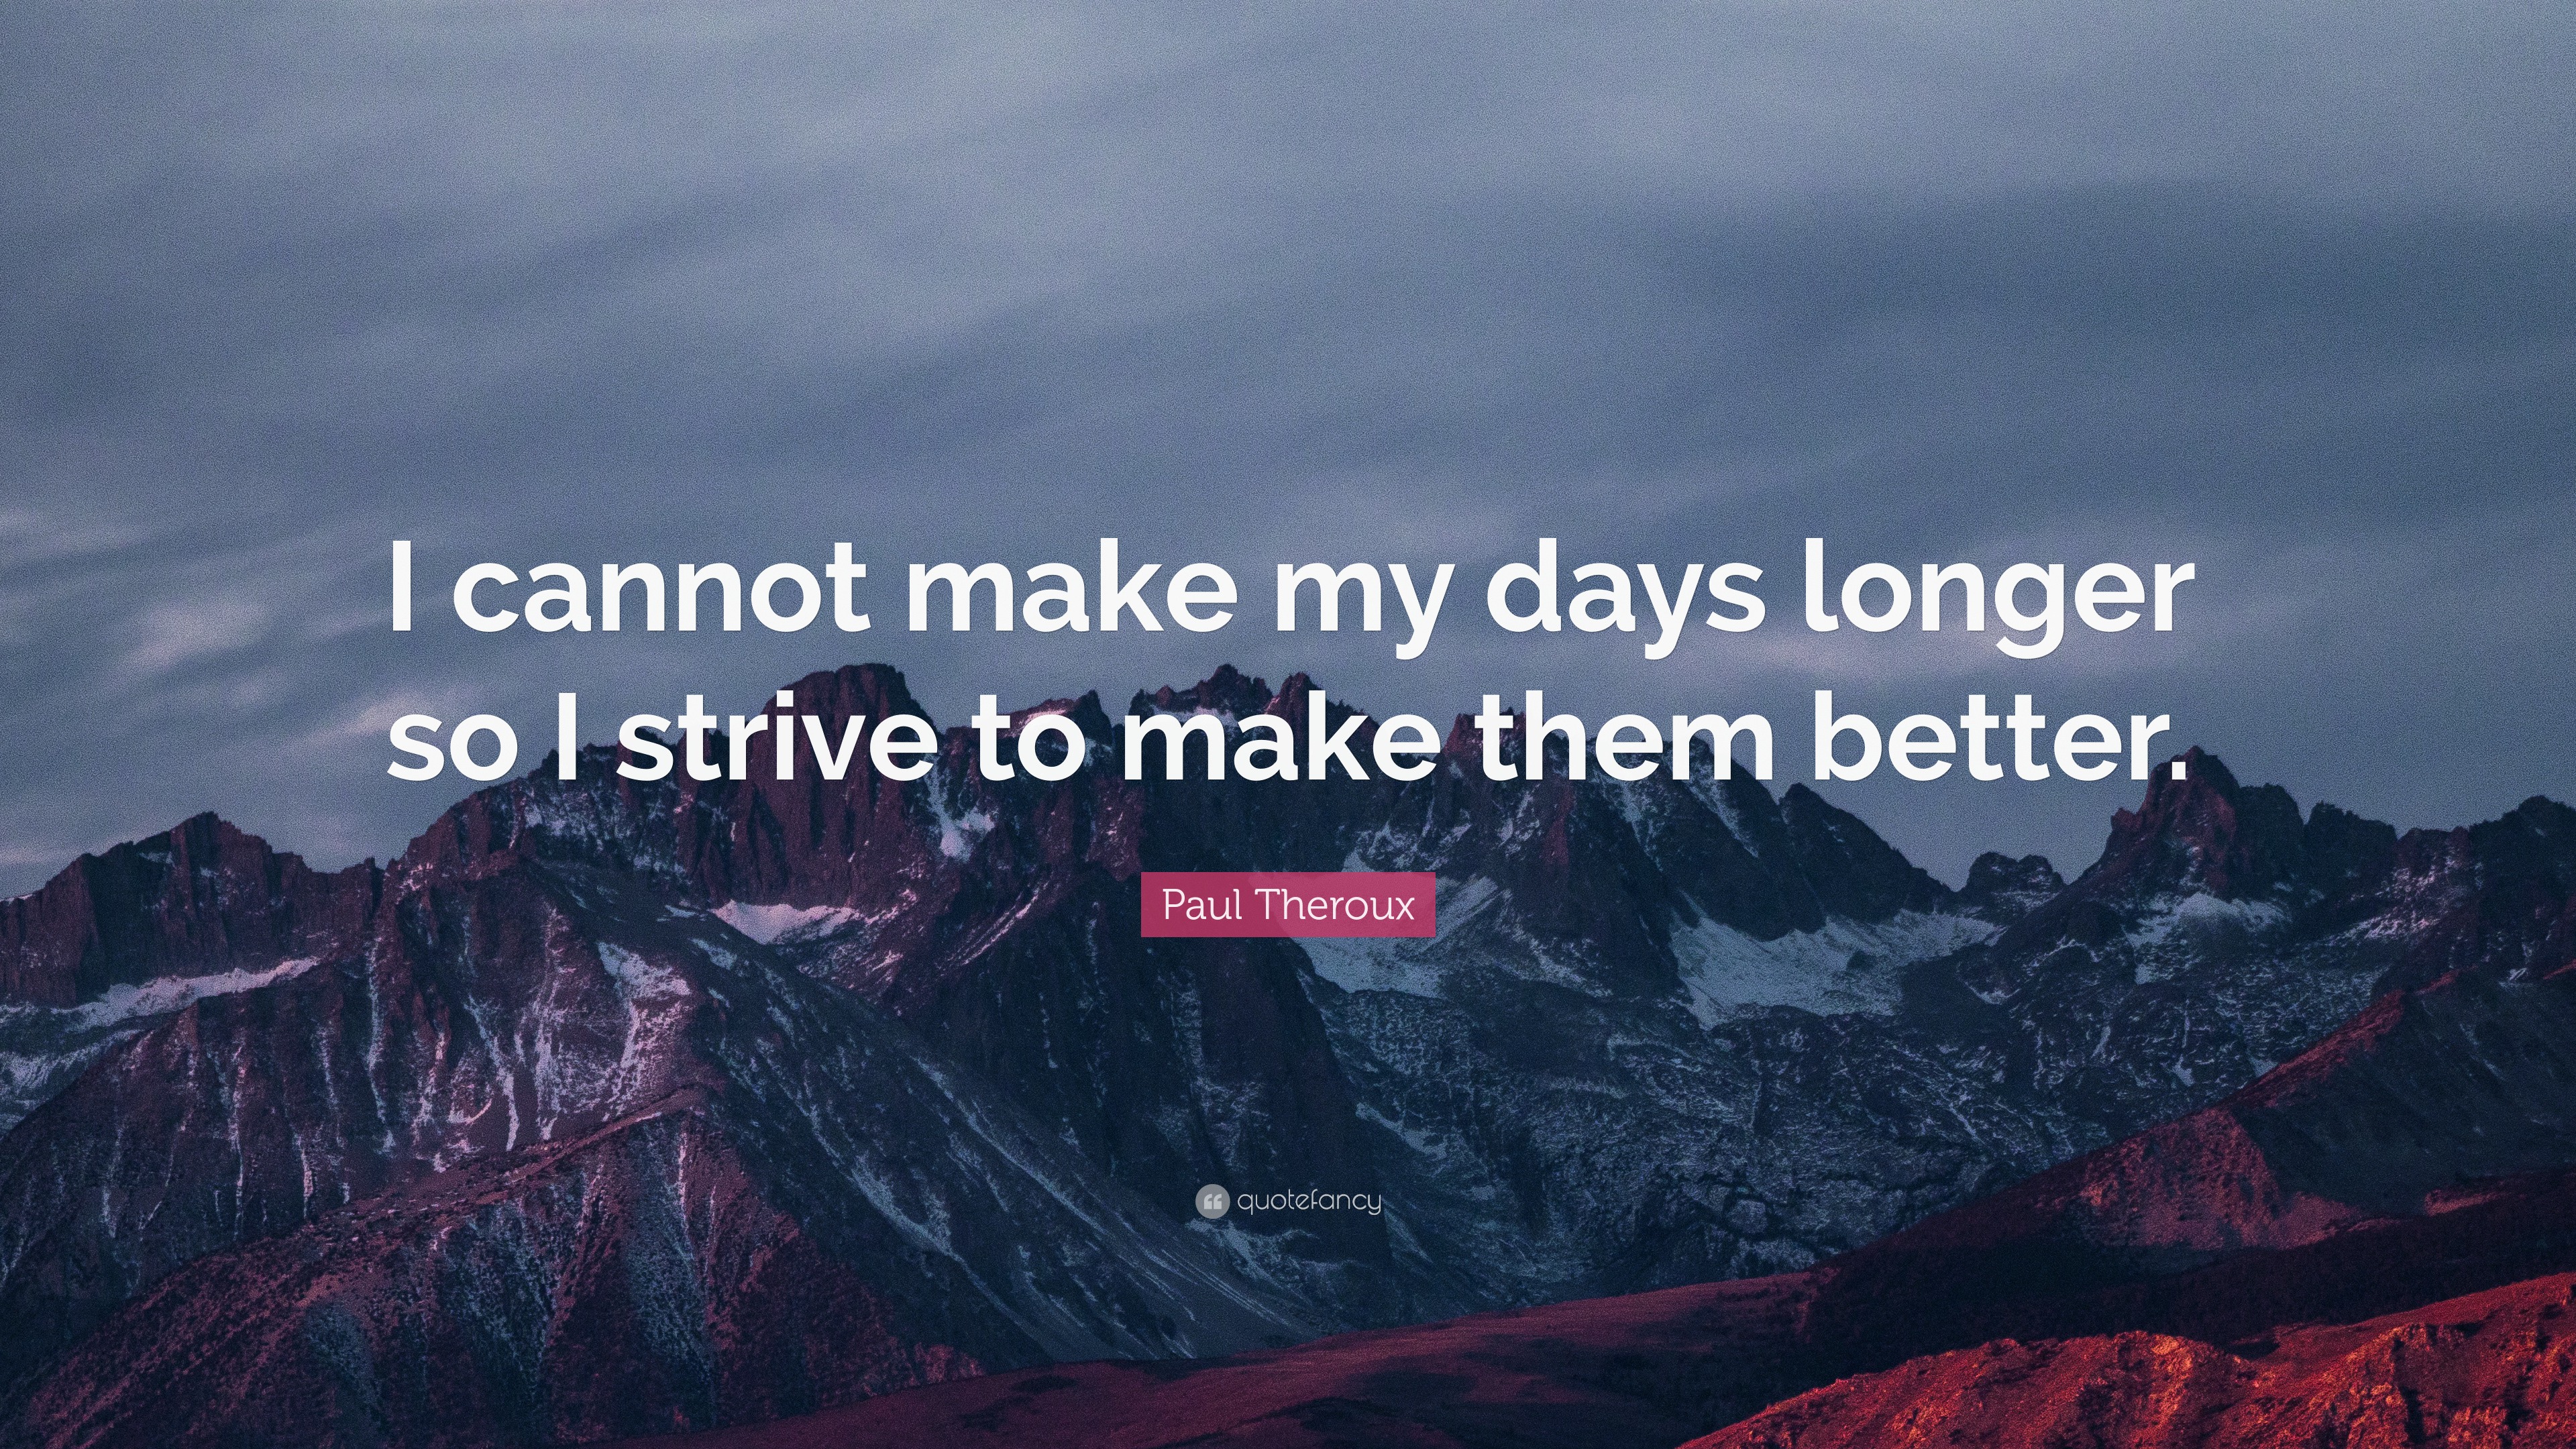 Paul Theroux Quote: “I cannot make my days longer so I strive to make ...